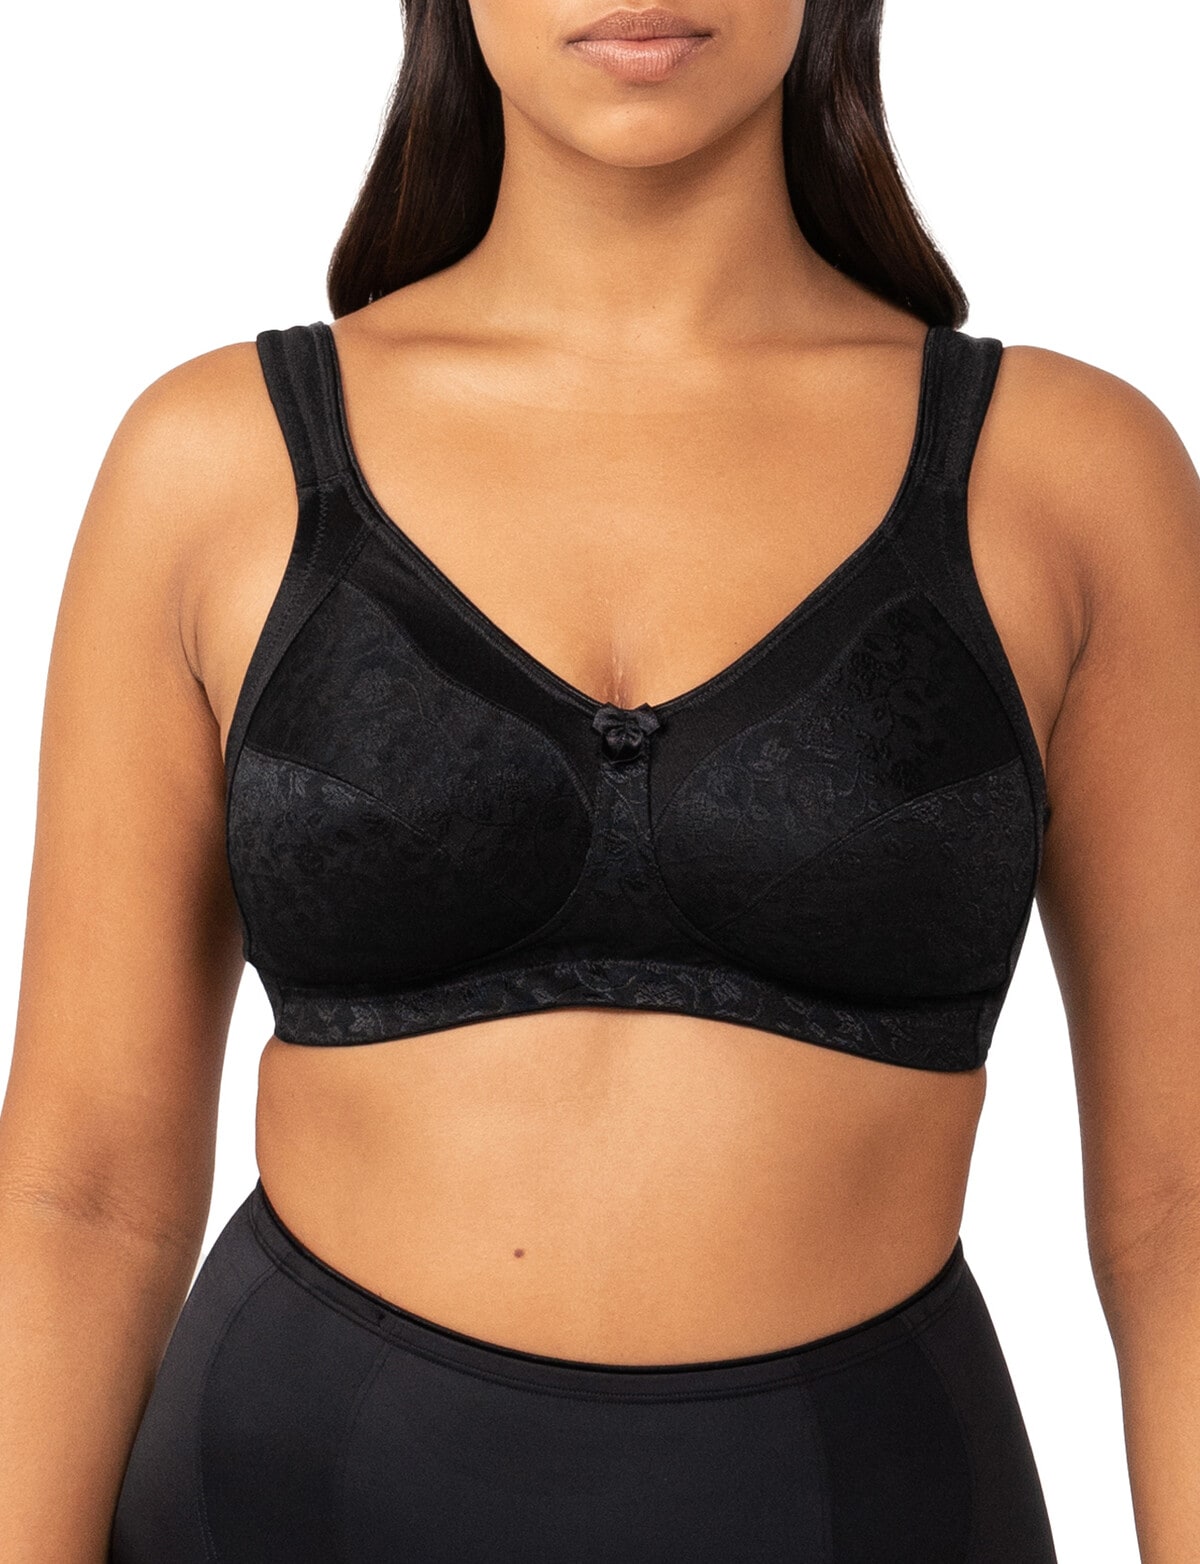 2 Woobilly Deep Cup Black Bras 42DD(E) NEW never used for Sale in